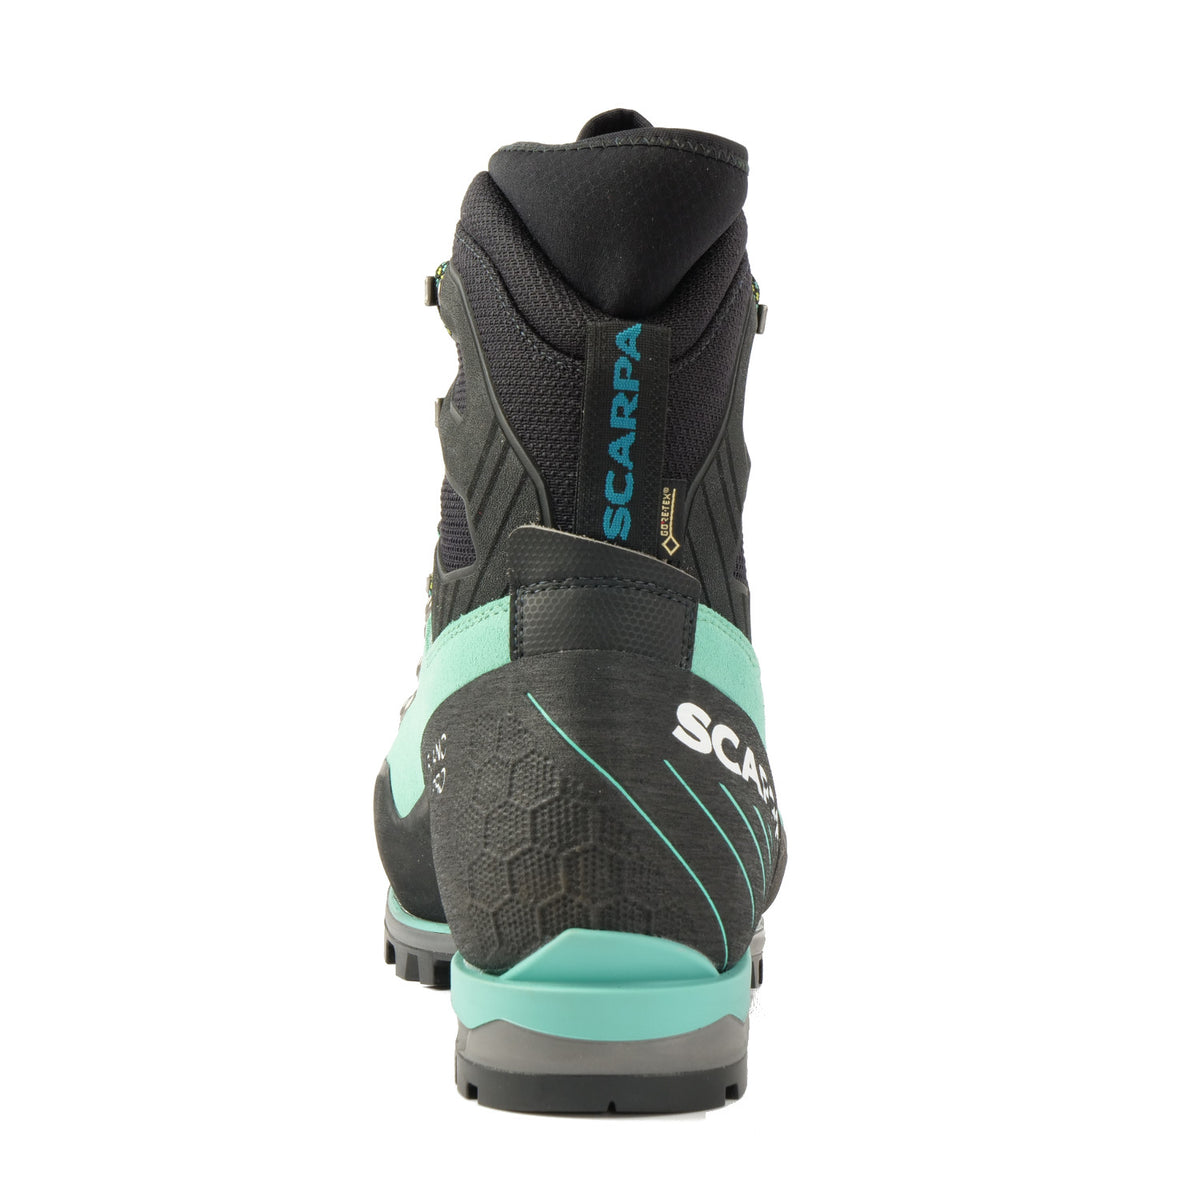 Rear view of the Scarpa Mont Blanc Pro GTX Womens with Mint Green Perwanger outer and black &amp; grey AC sole unit and blue Scarpa logo on the pull tap